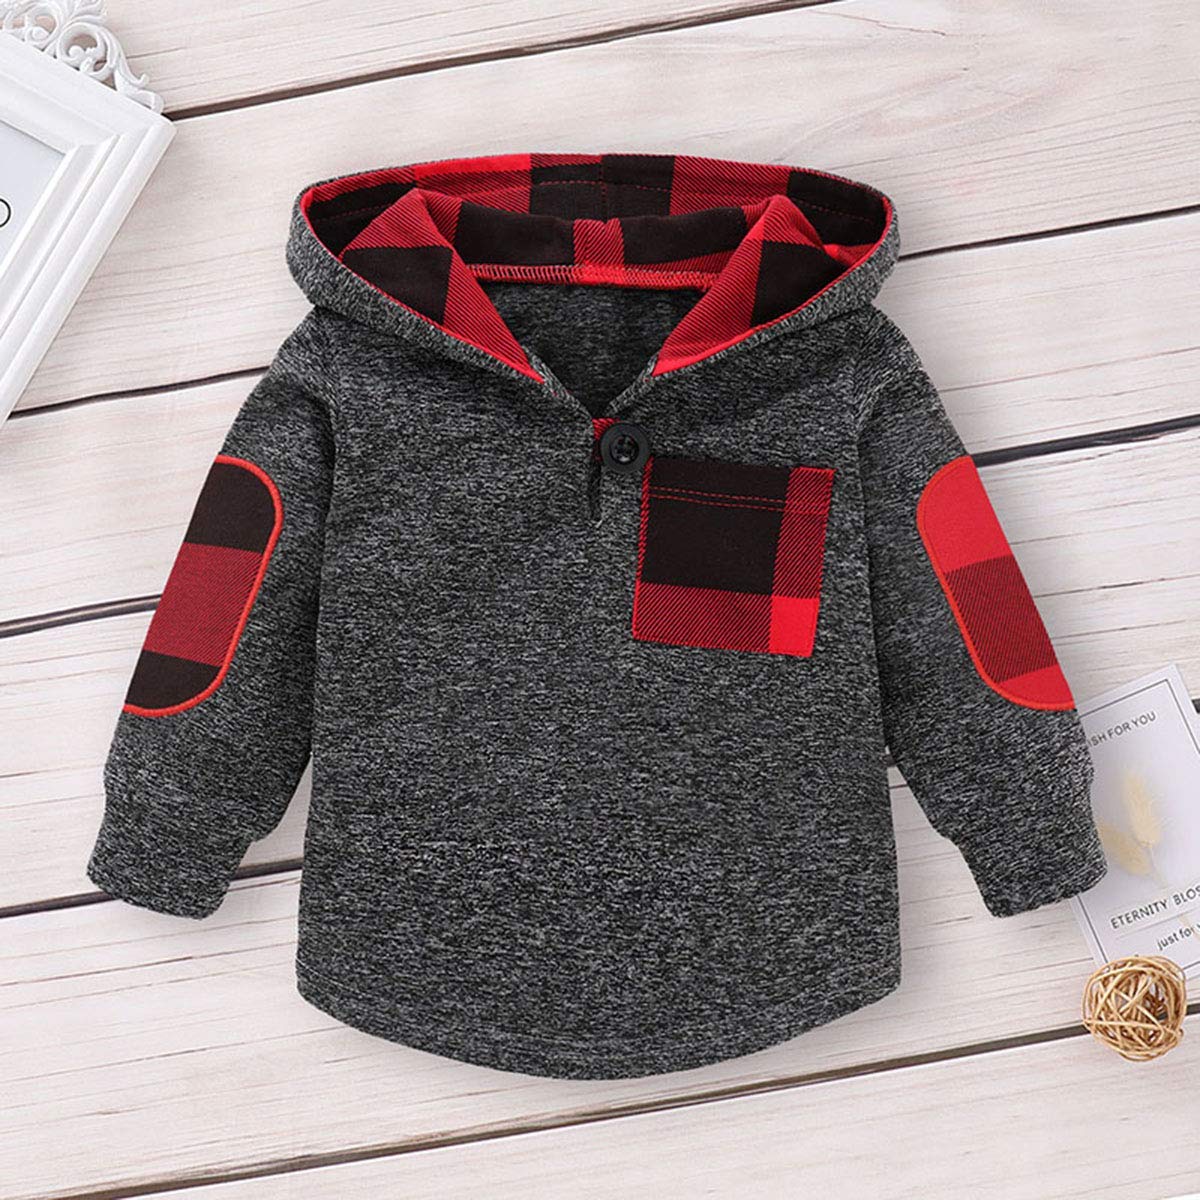 Kids Toddler Infant Baby Boys Girls Fall Outfit, Red Plaid, Size 18-24 ...